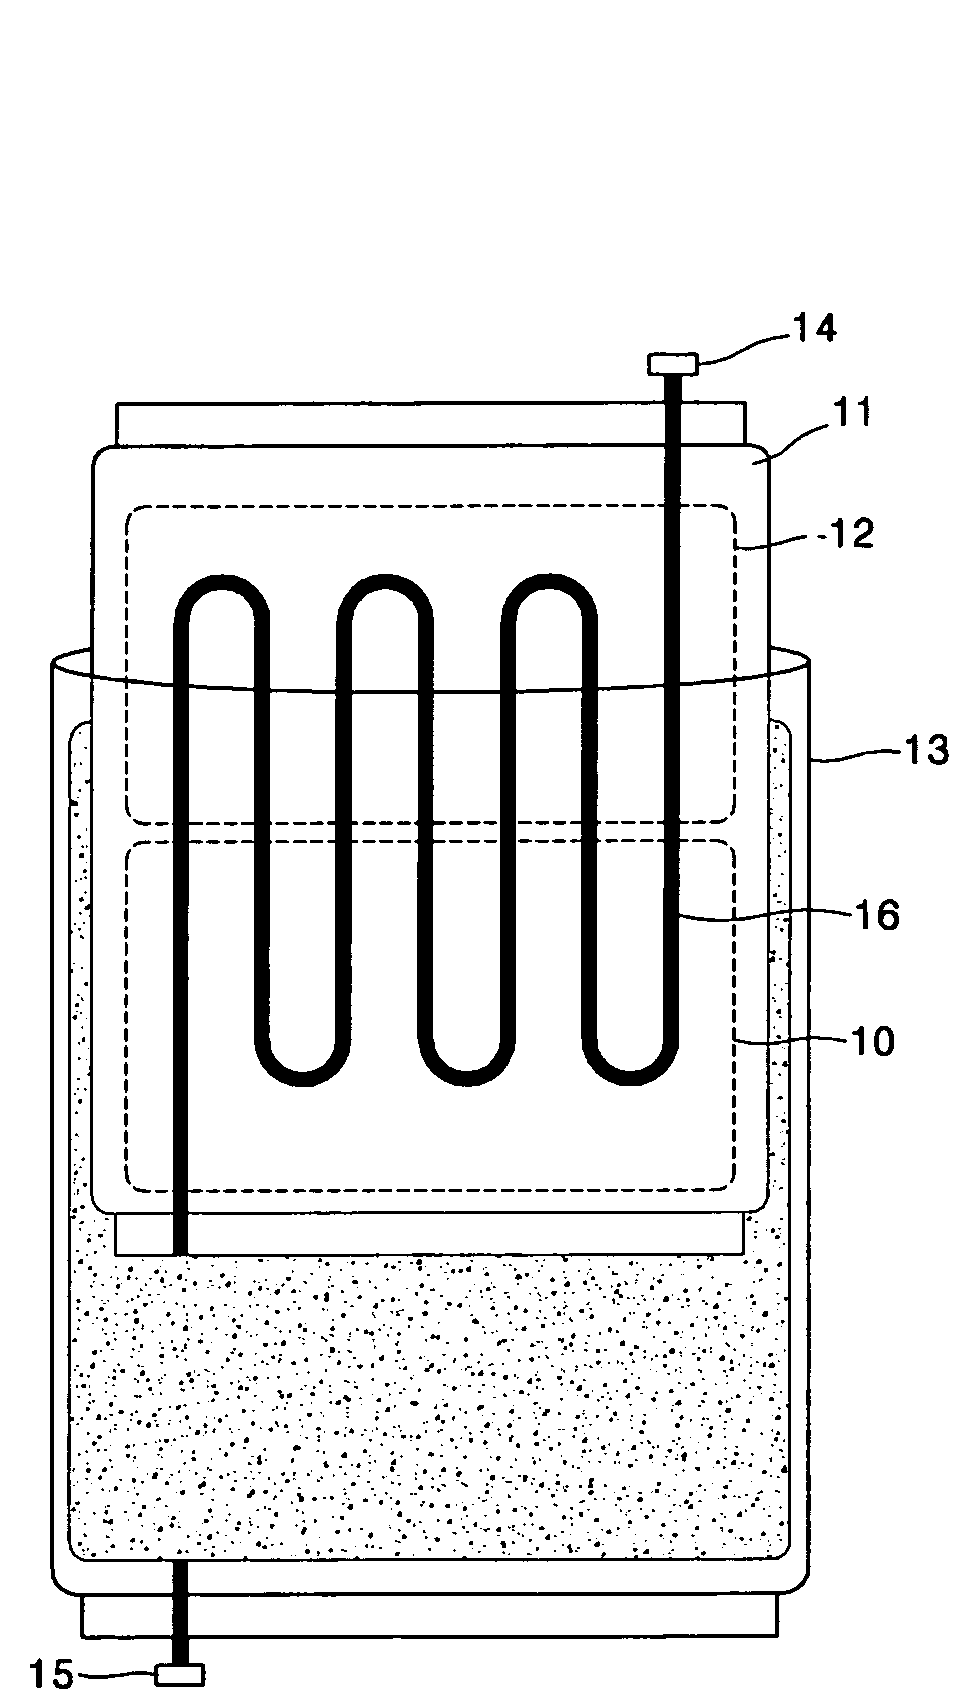 Cell lysis by heating-cooling process through endothermic reaction